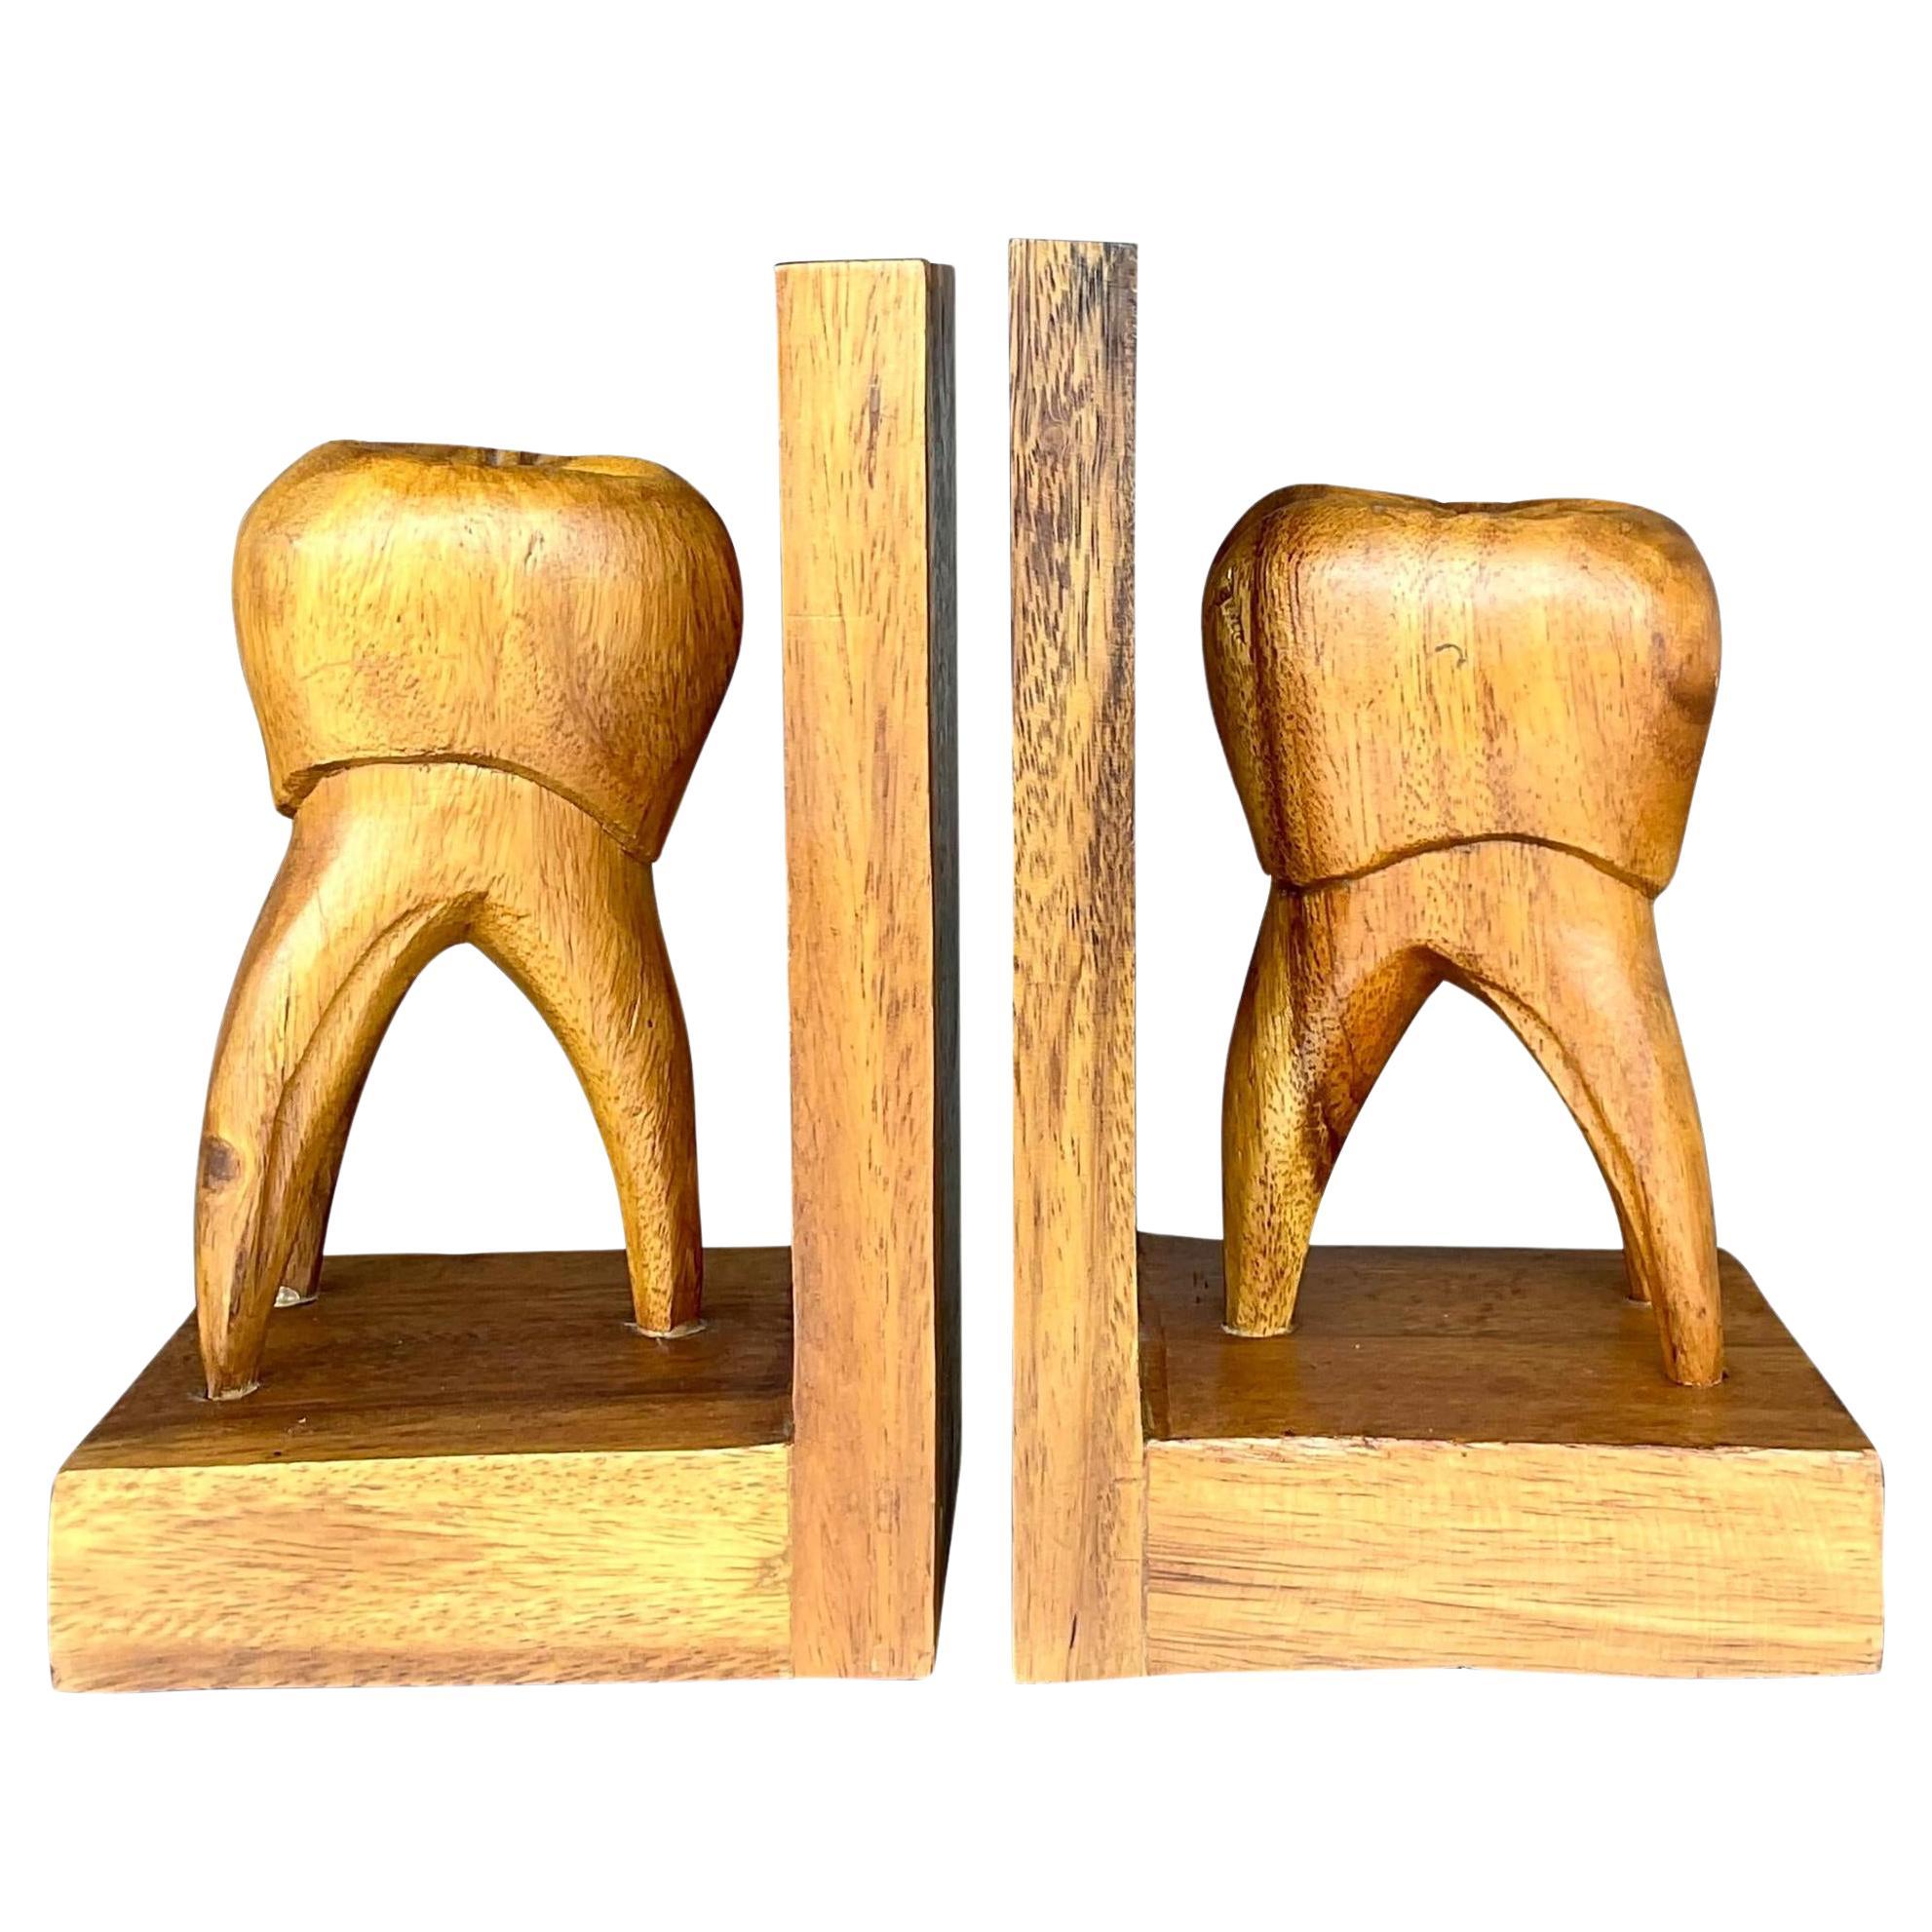 Vintage Boho Tooth Bookends - a Pair For Sale